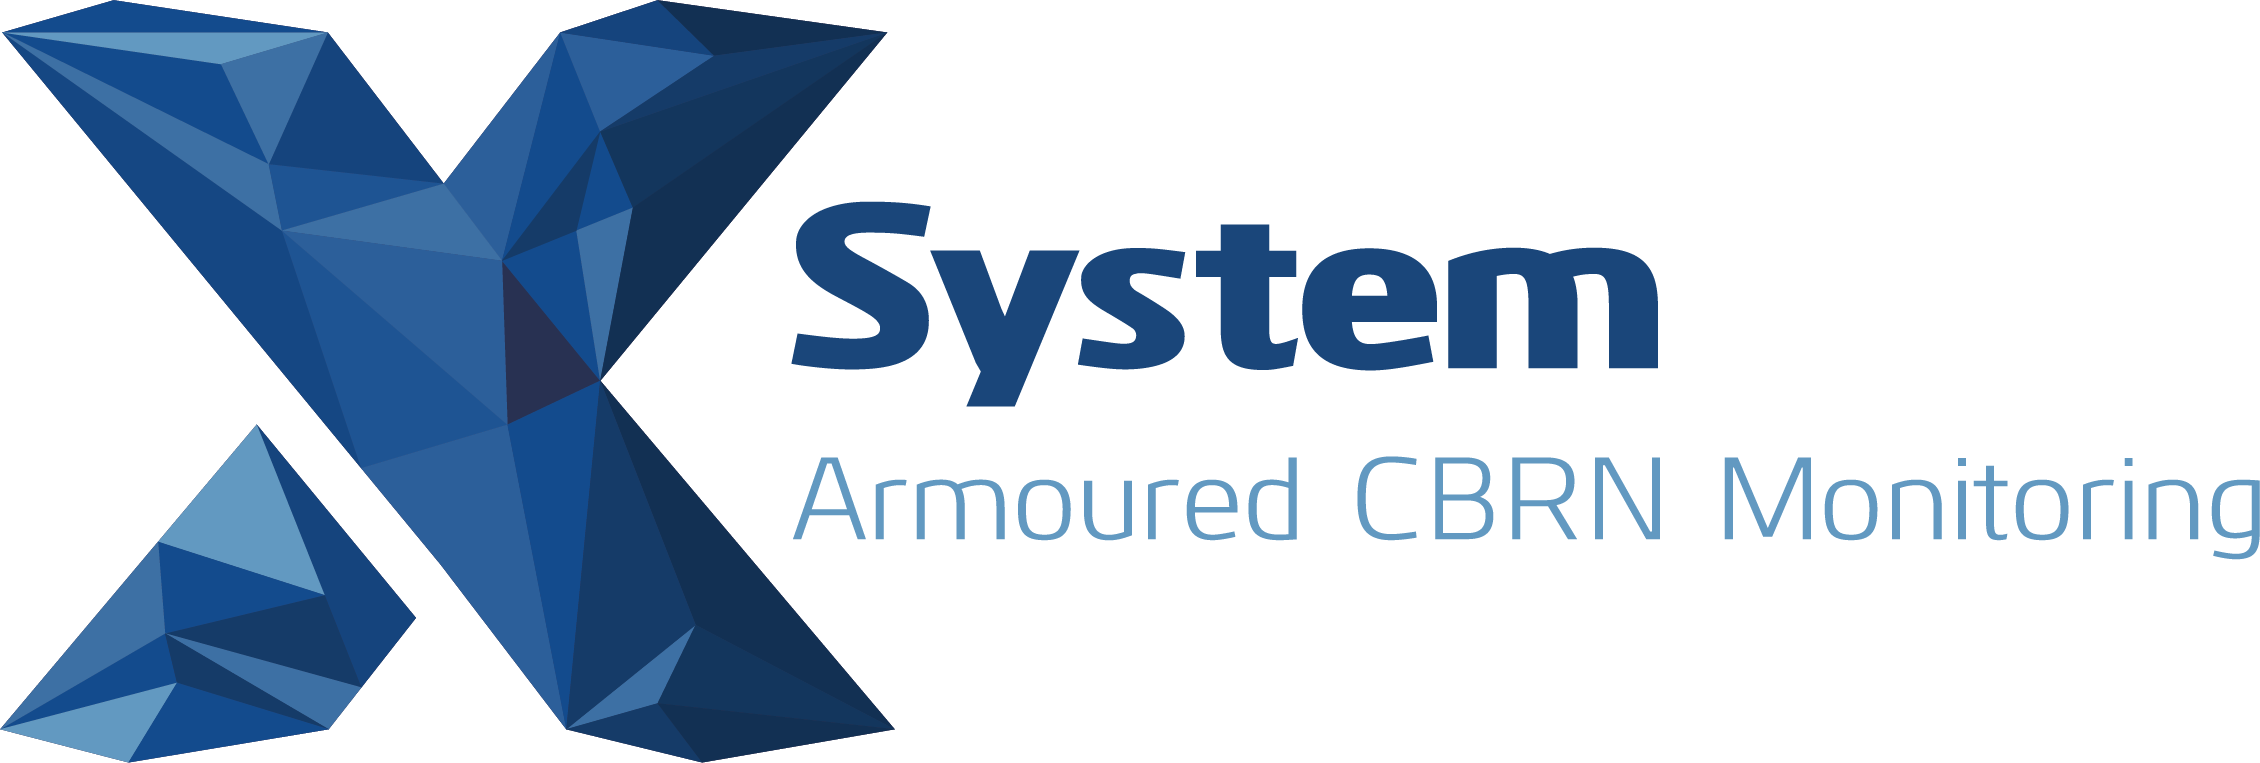 X-System Armoured CBRN Monitoring